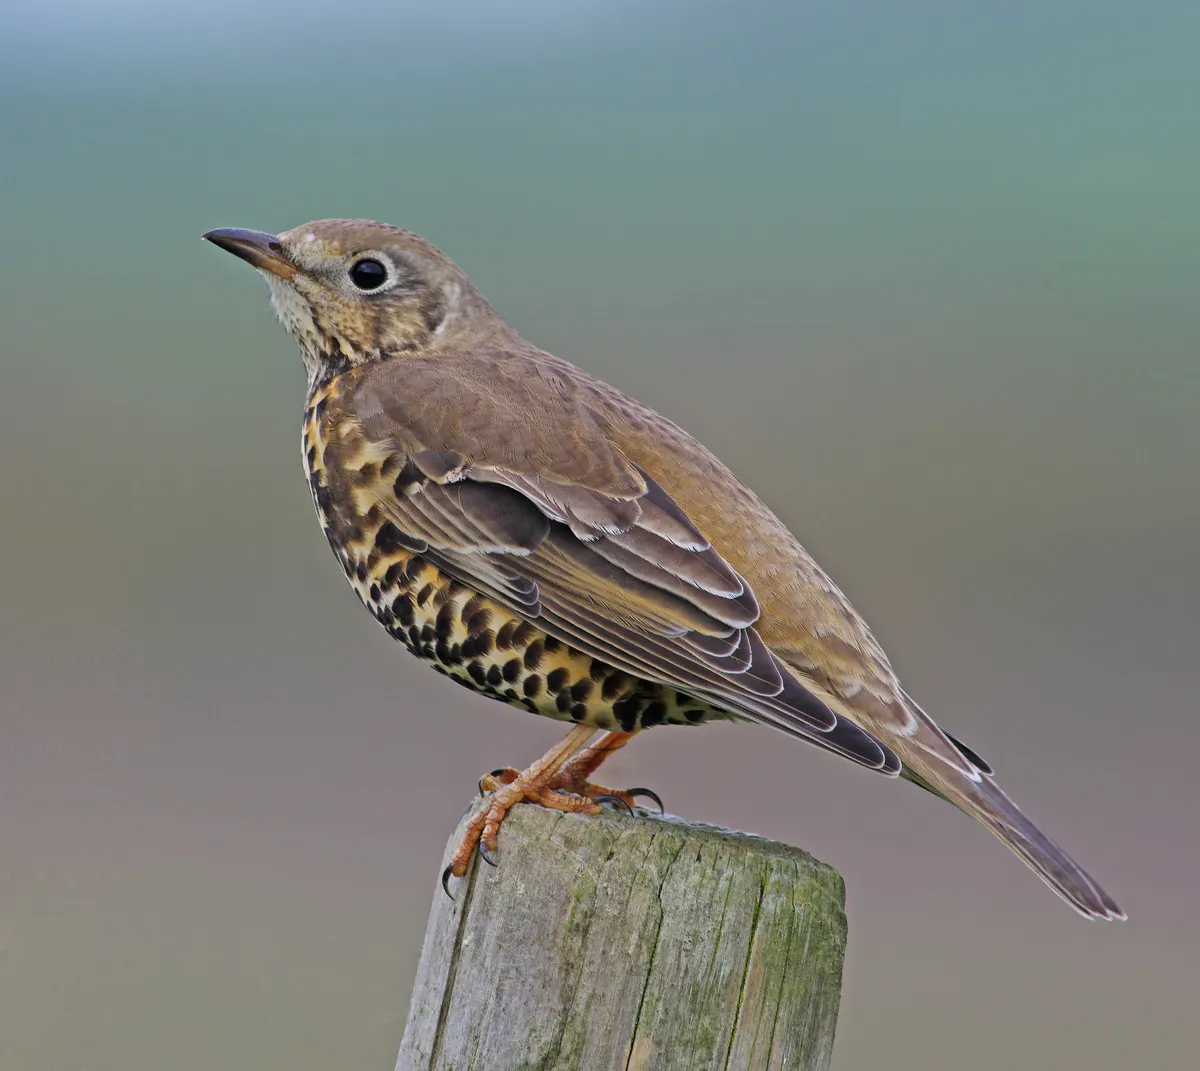 A mistle thrush perched on a wooden fence post